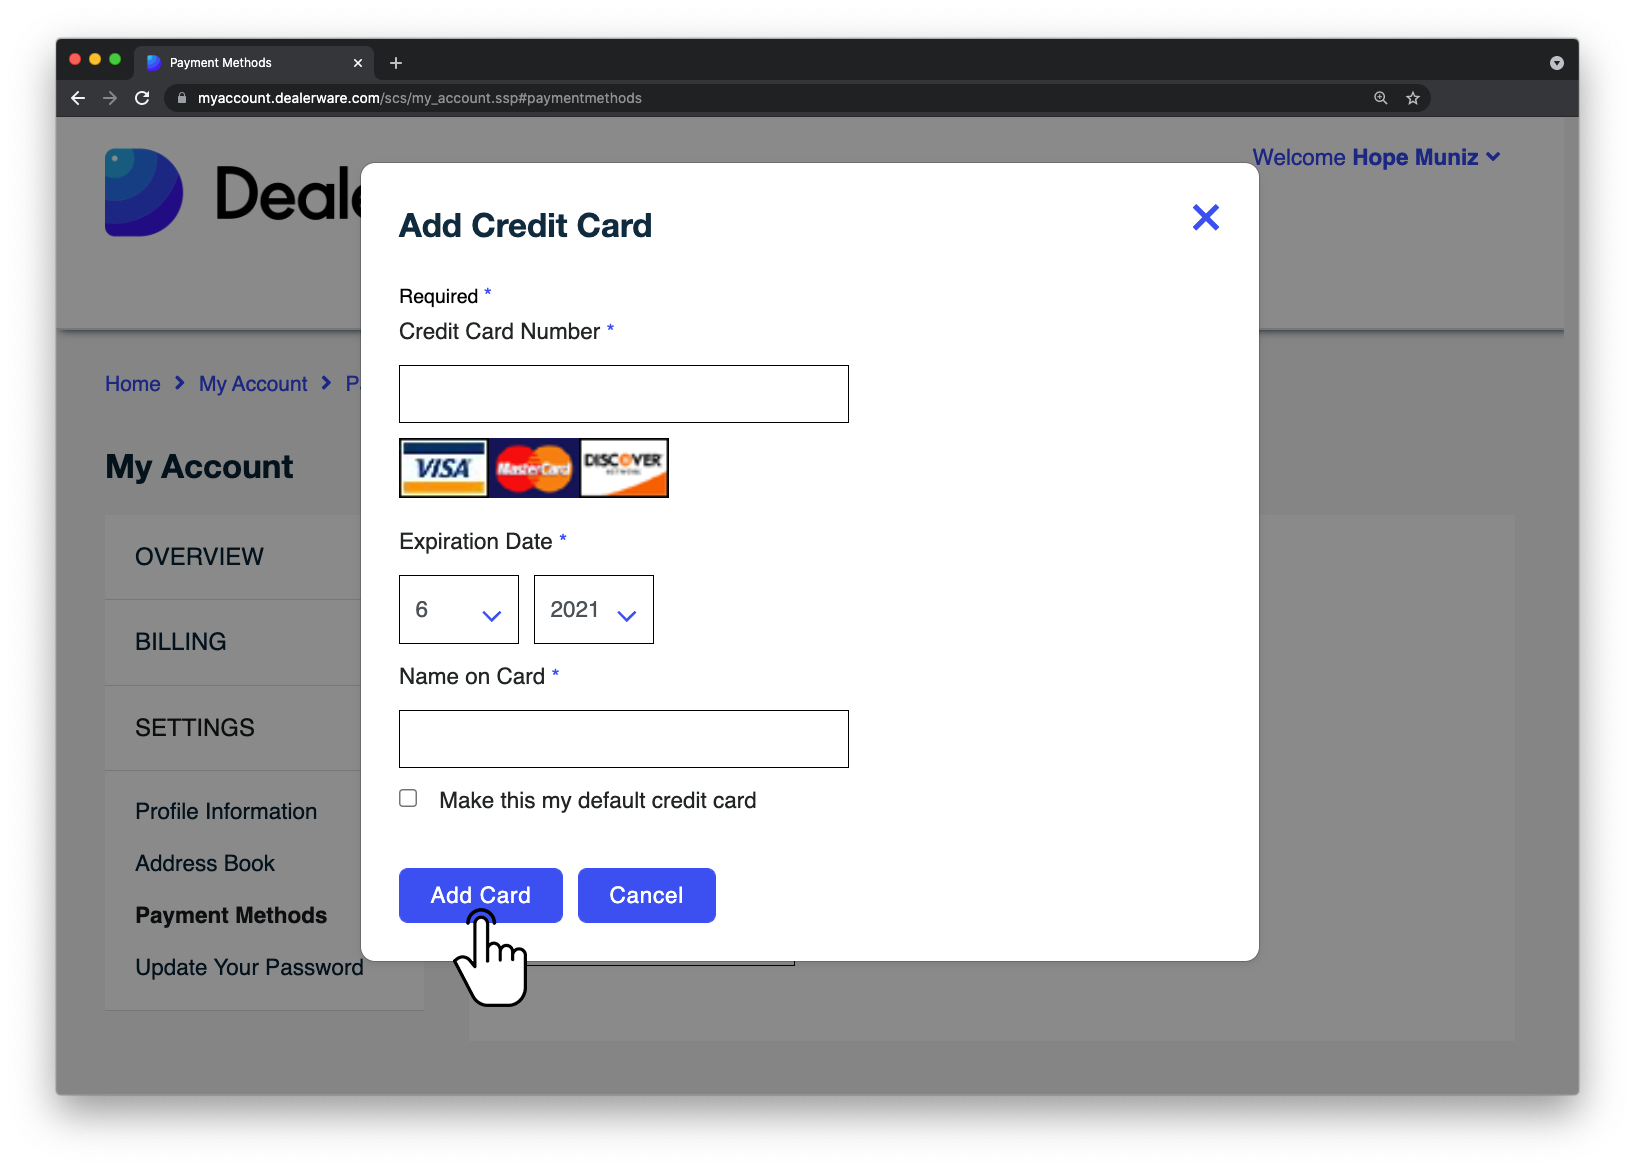 Image 4: Dealerware MyAccount screen, fingertap icon positioned over Add Card button in Add Credit Card pop-up